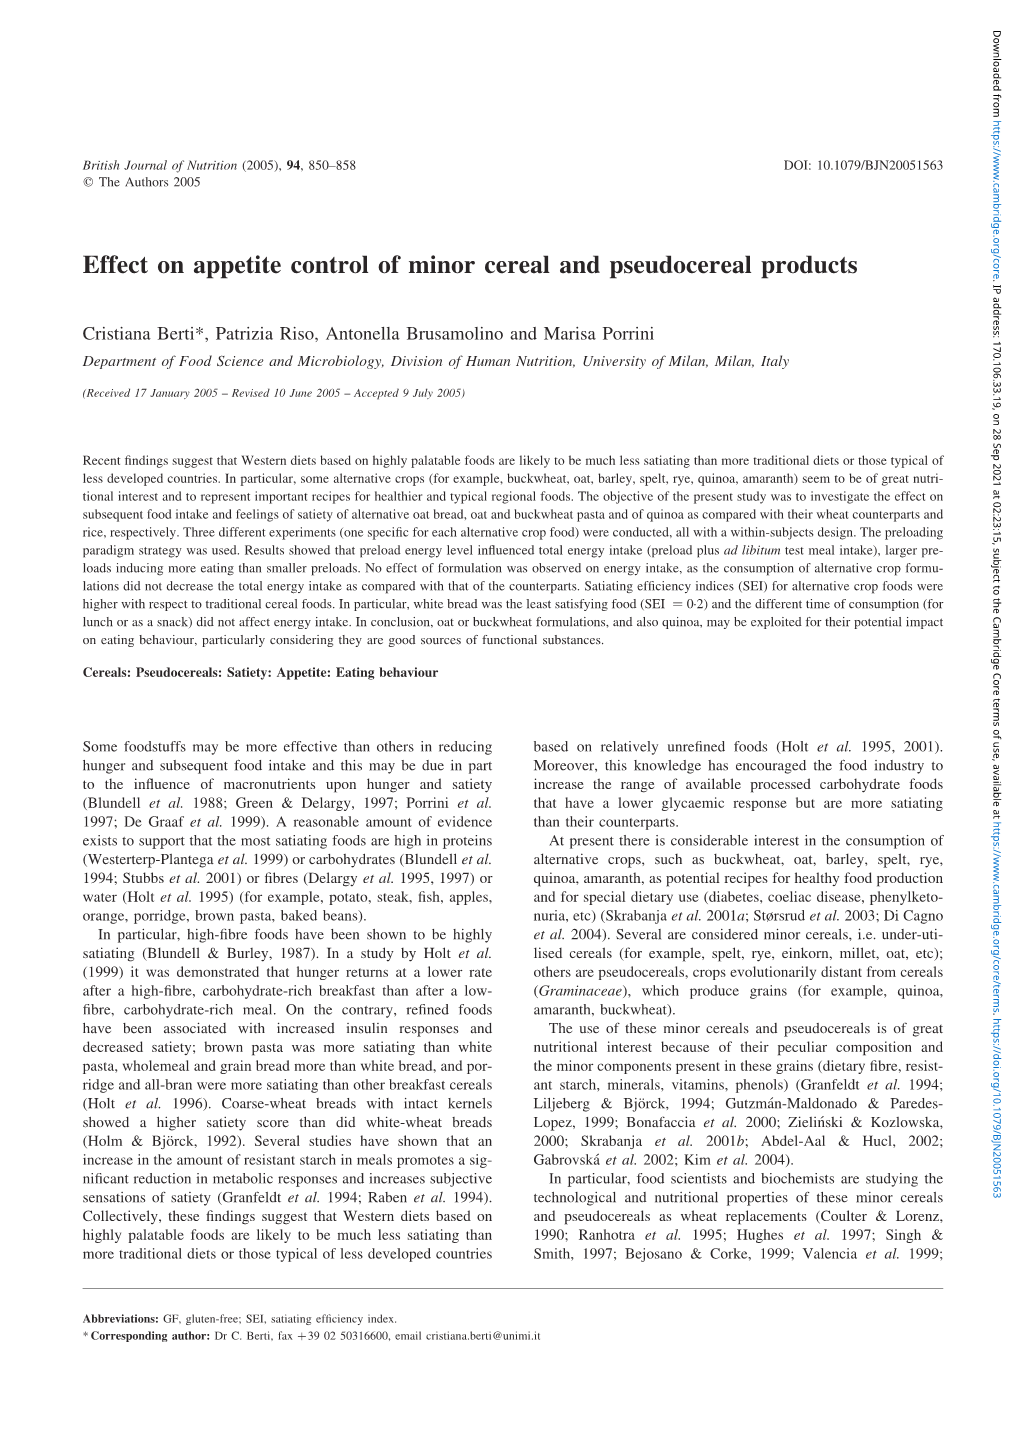 Effect on Appetite Control of Minor Cereal and Pseudocereal Products